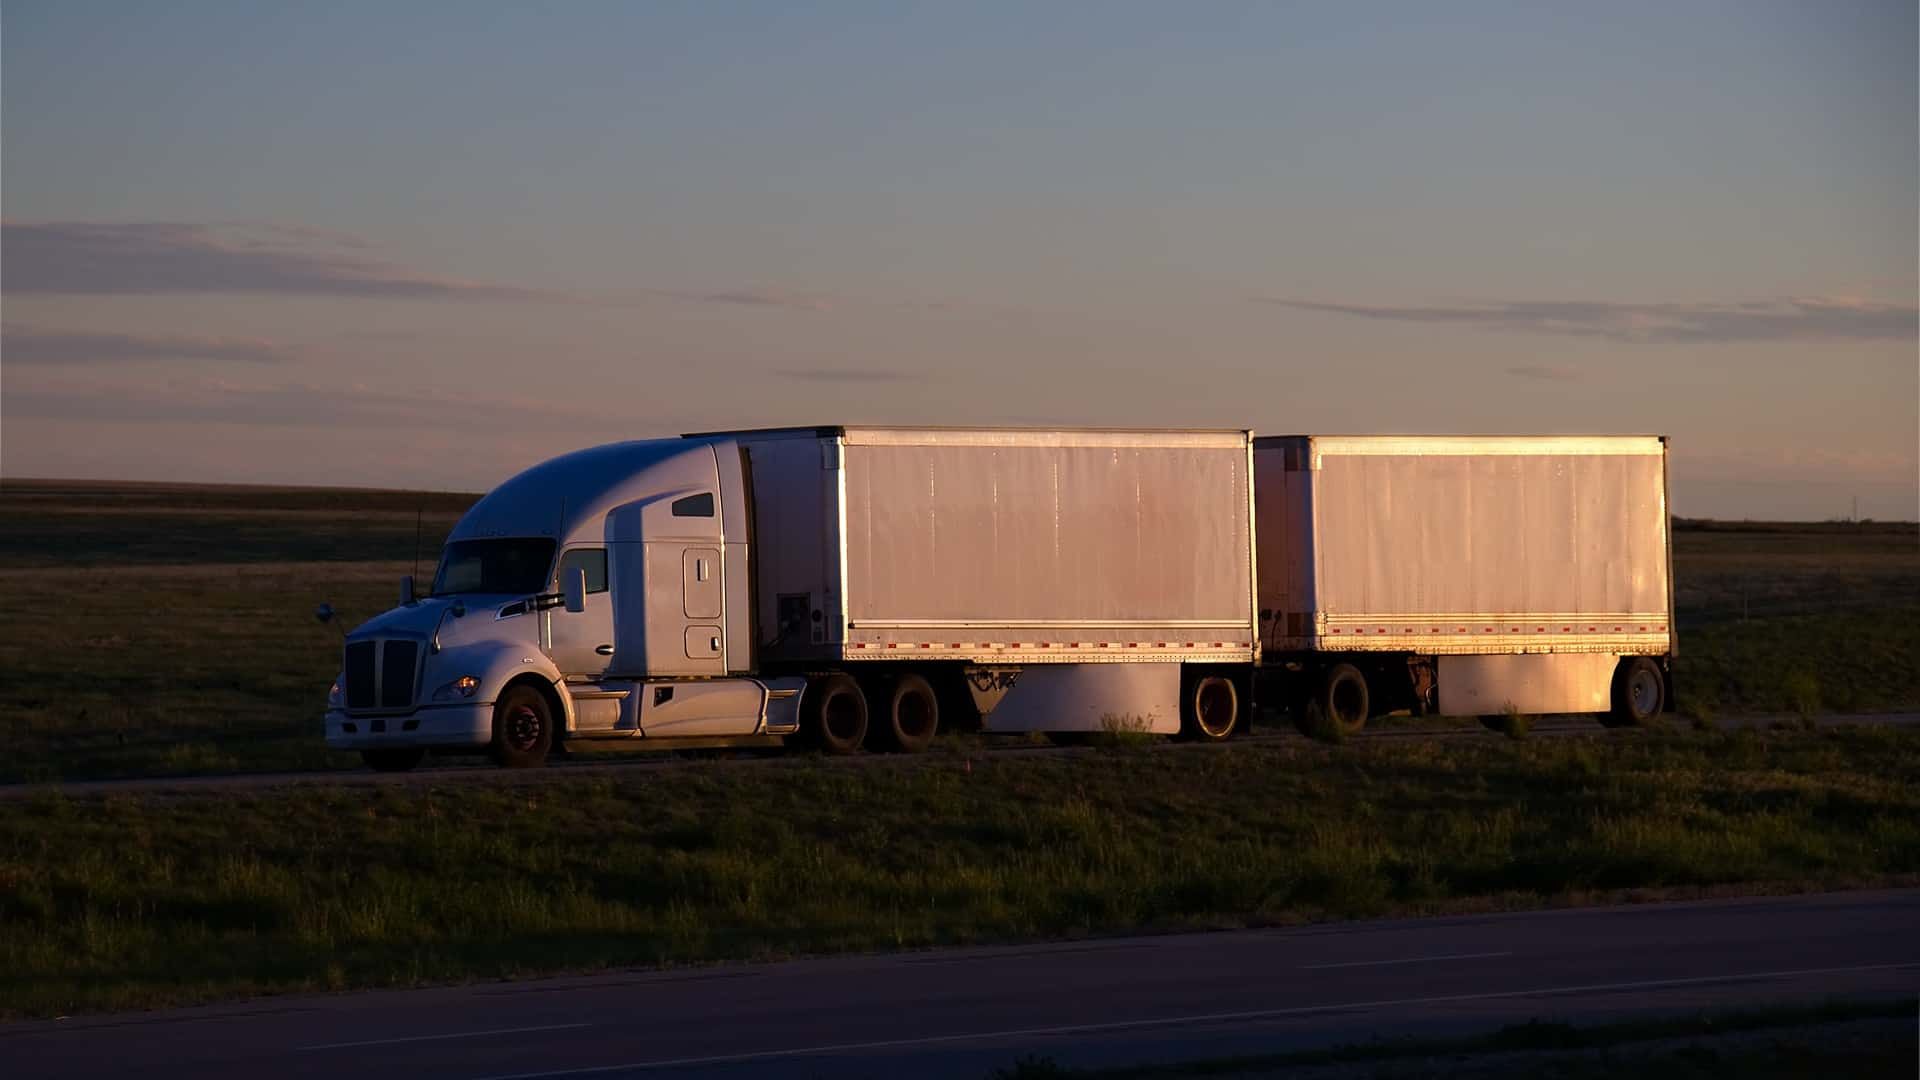 Truck driving on the hiving in the evening near Nicholasville, KY